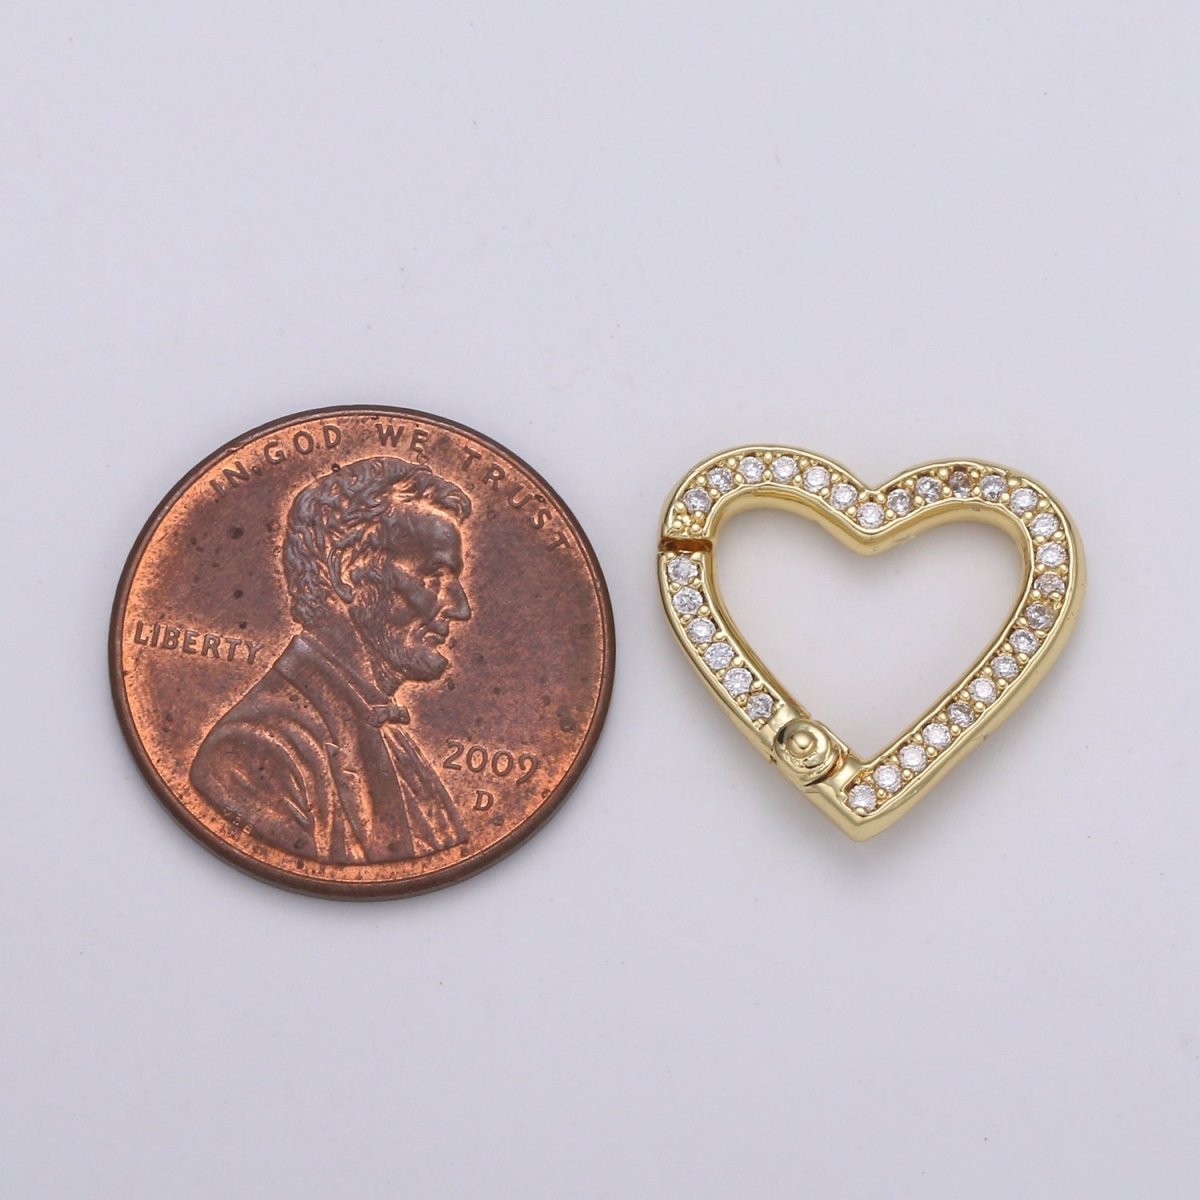 14k Gold Filled CZ Micro Pave Heart Carabiner Clasp with Easy Open Spring, Heart Spring Snap Clasp Silver for Link Connector Chain L-171 L-172 - DLUXCA